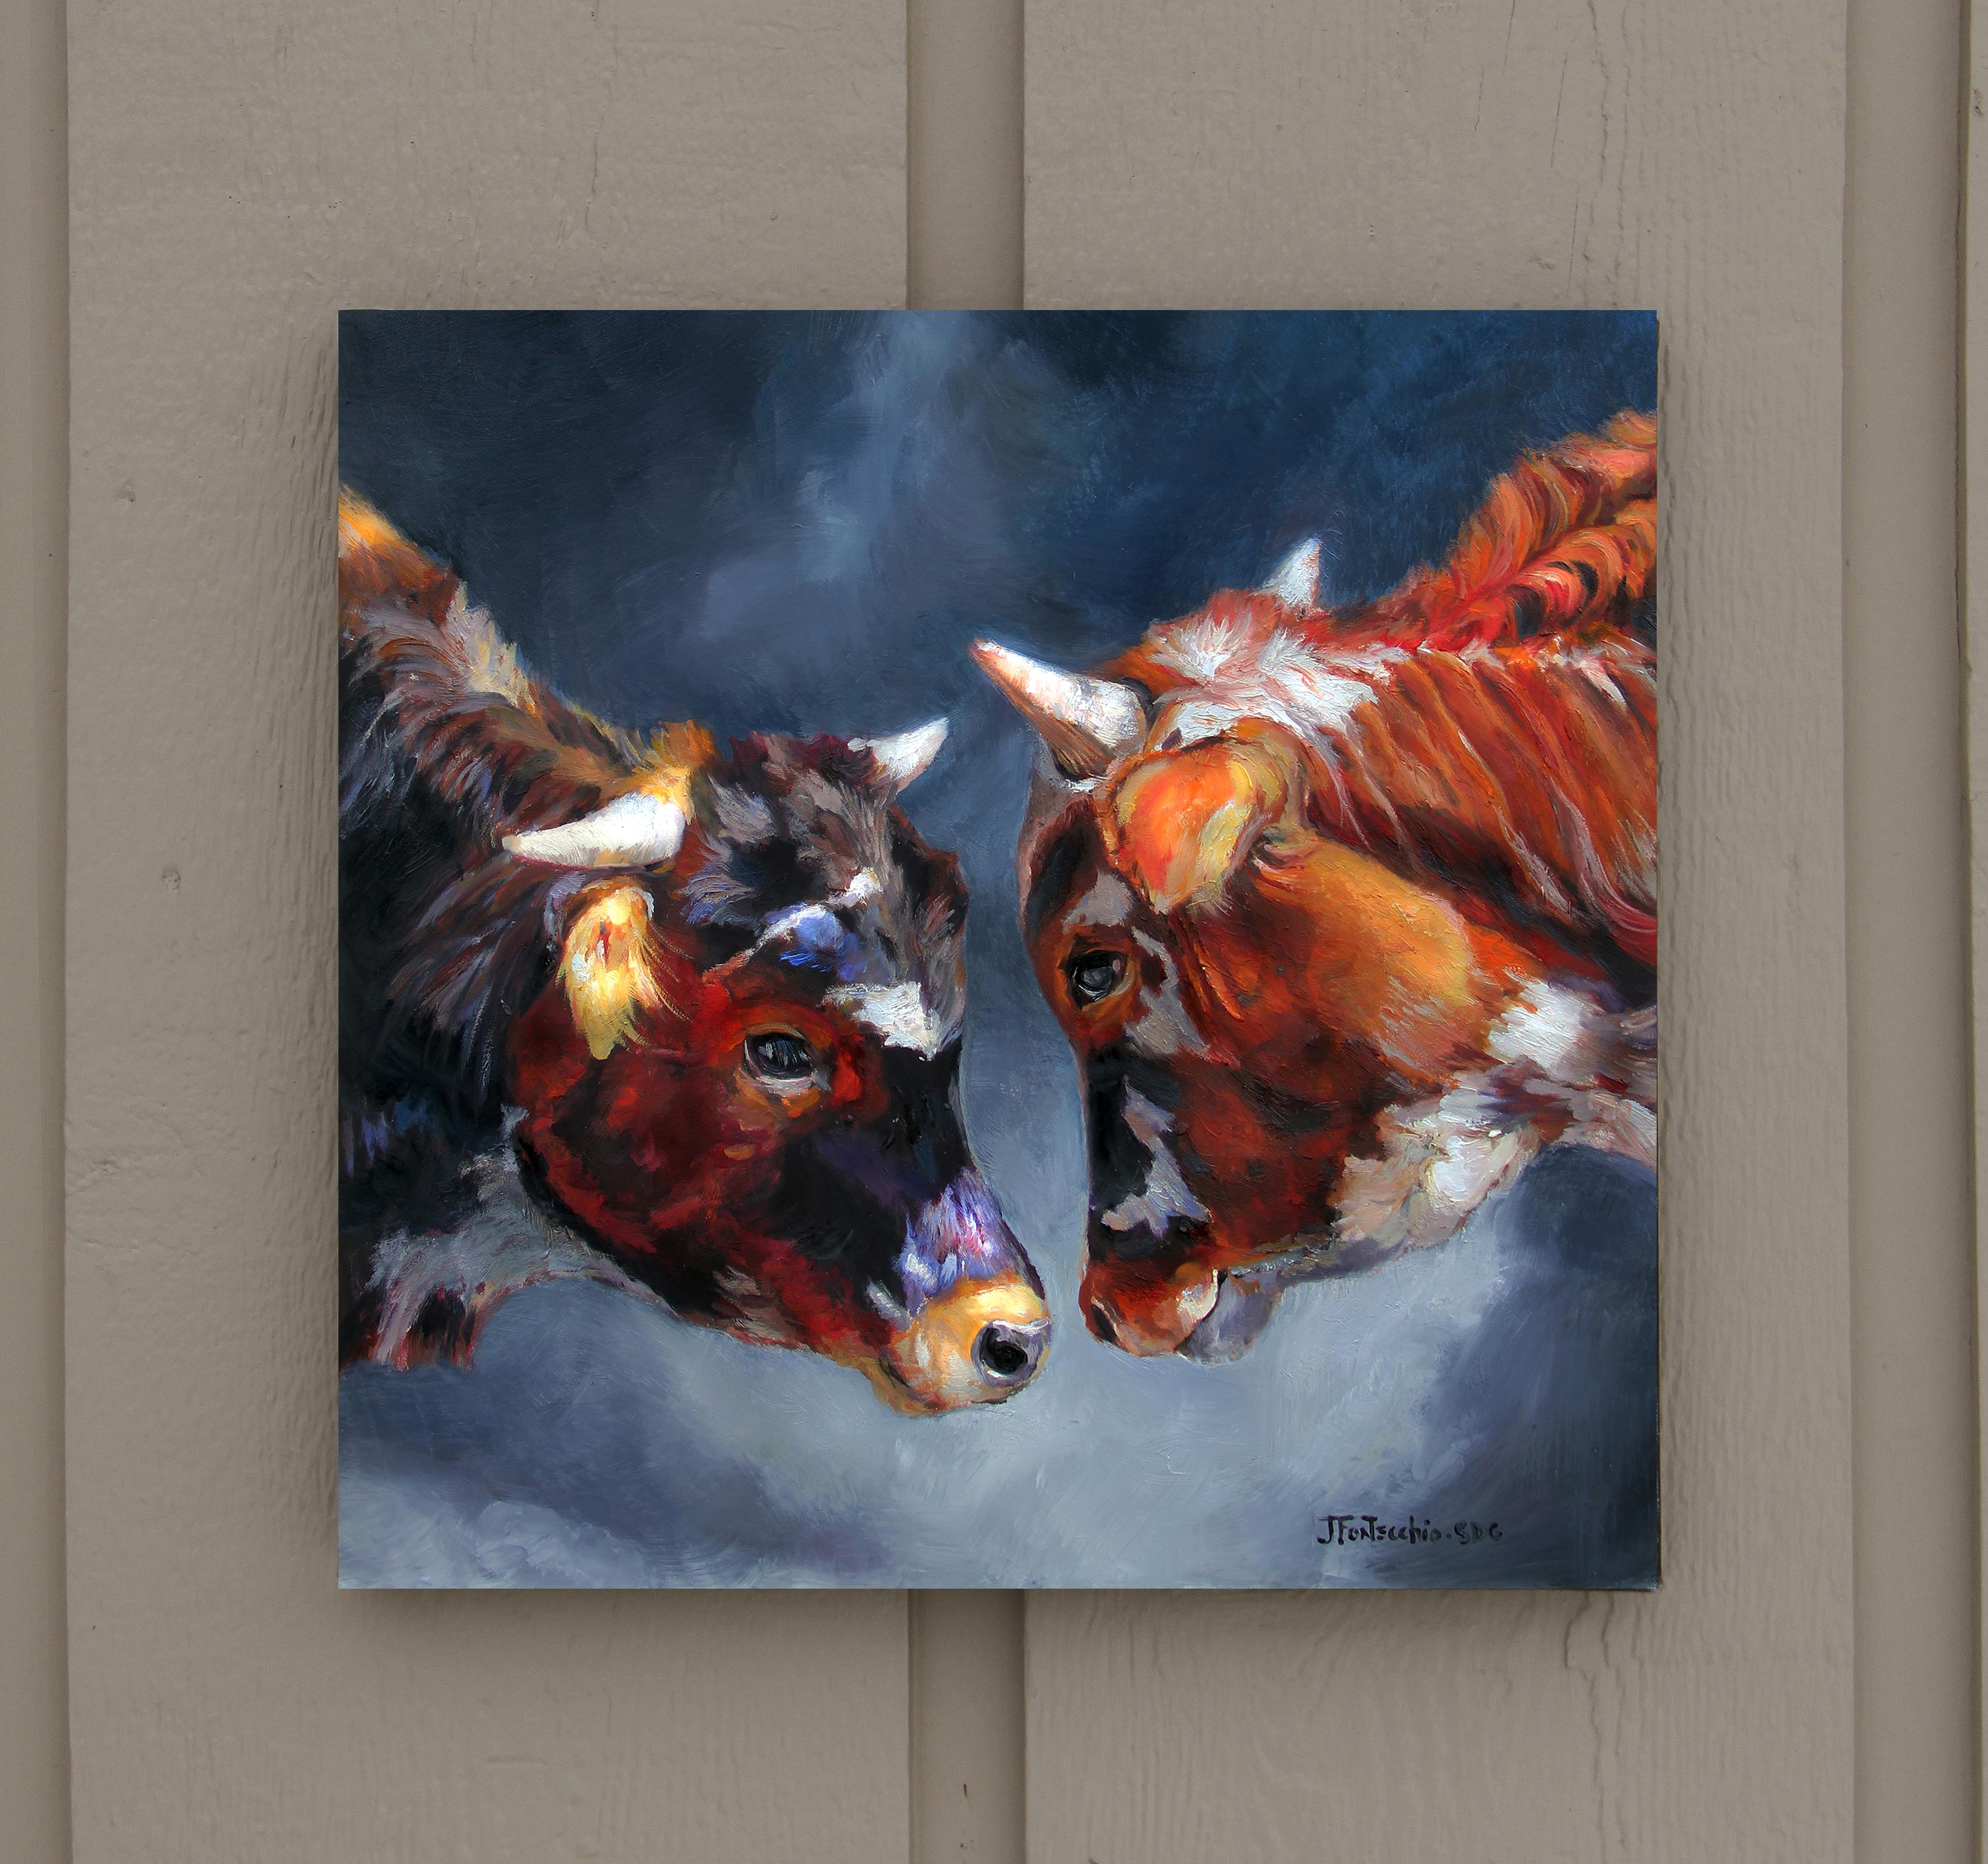 <p>Artist Comments<br />Two young longhorns eyeing one another. This photo was captured in Texas by a friend.</p><p>About the Artist<br />Jan’s lifelong passion for animals and art have collided in the images she paints.  Her Western subject matter